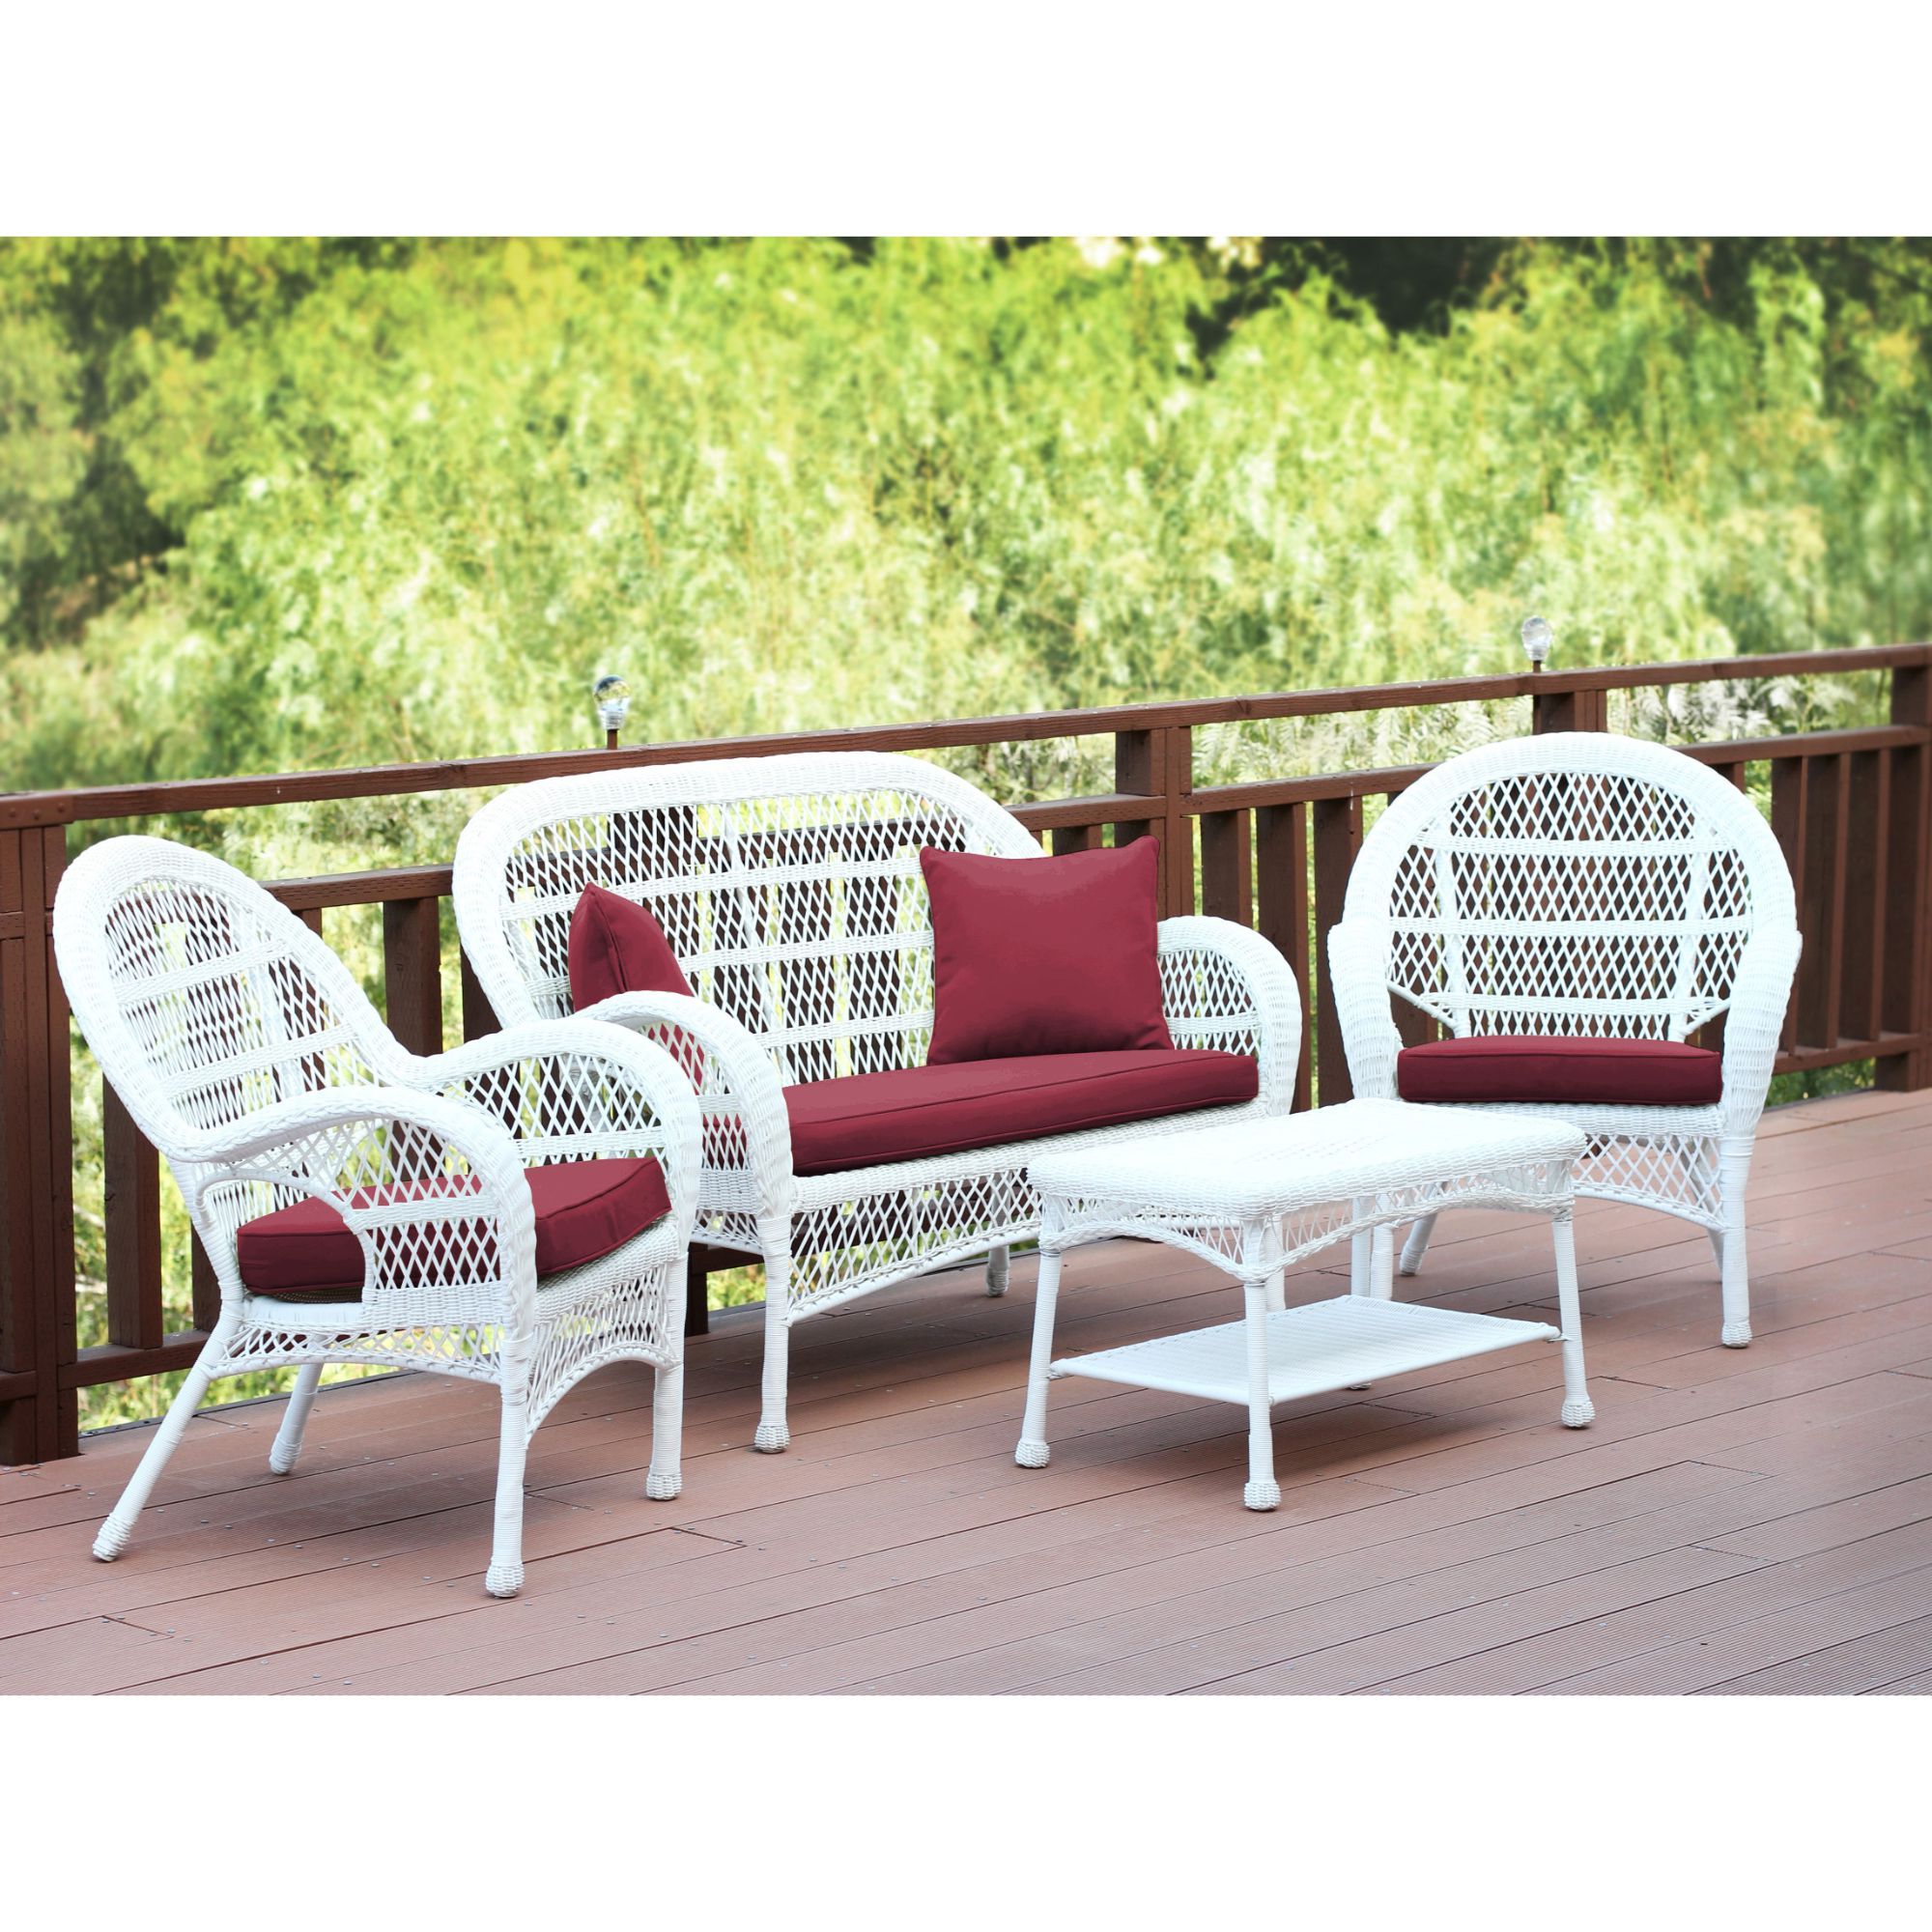 Most Current 4 Piece Outdoor Sectional Patio Sets Within 4 Piece White Wicker Outdoor Furniture Patio Conversation Set – Red (View 14 of 15)